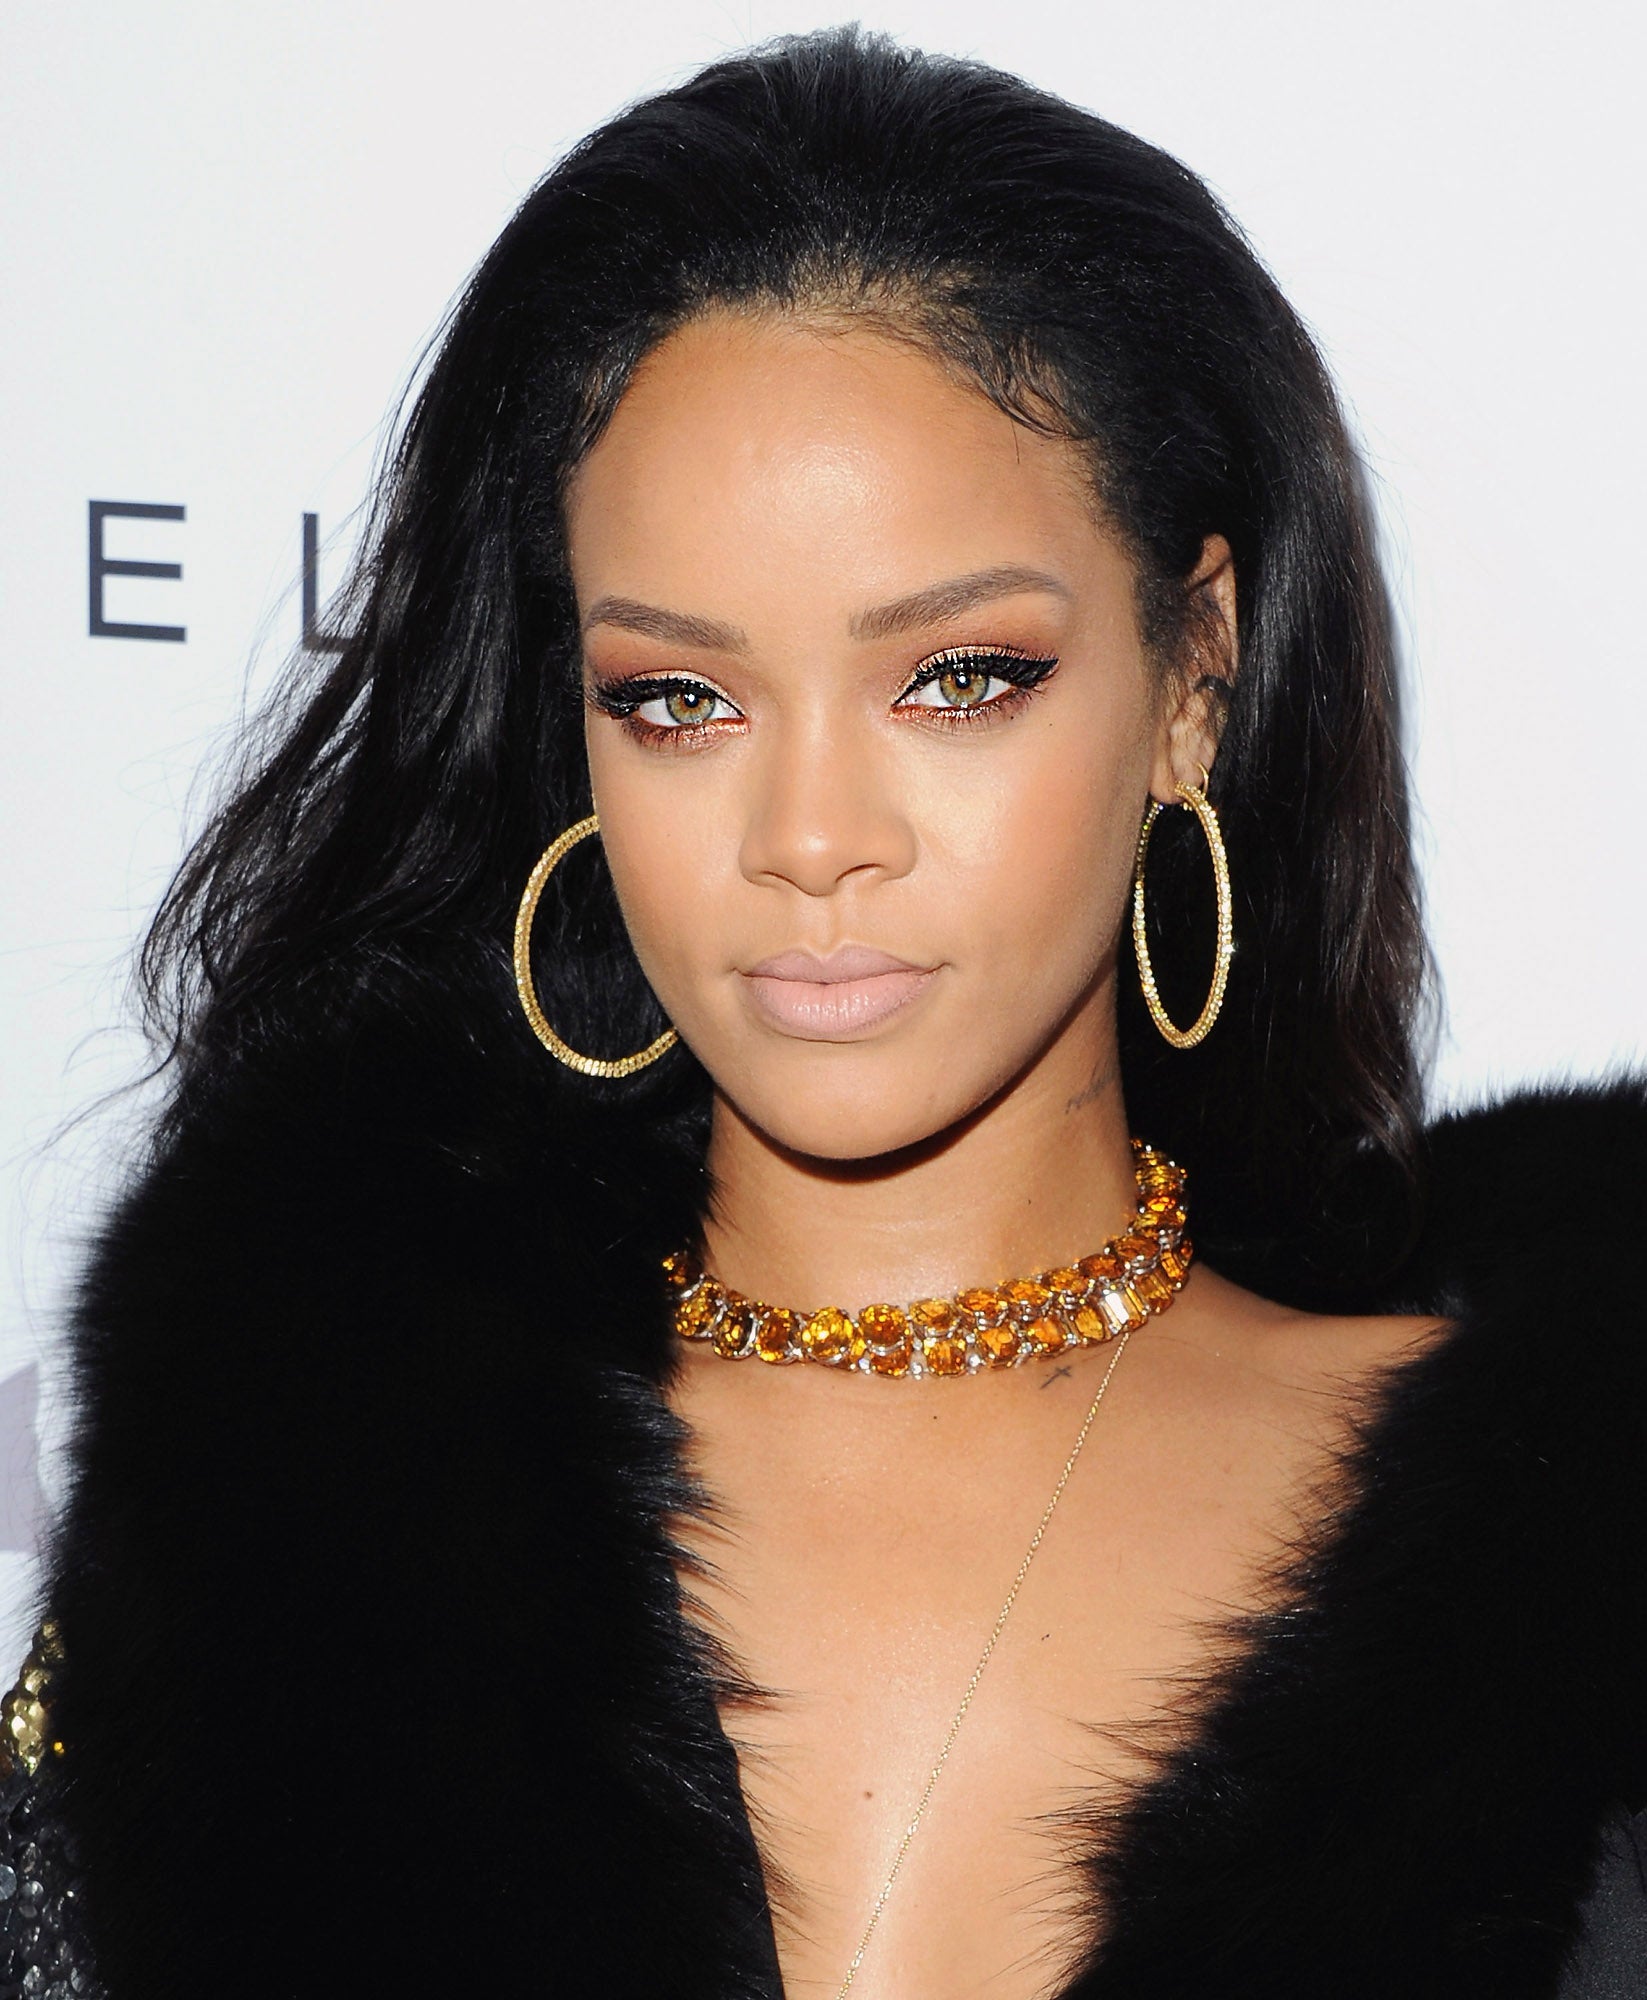 Coffee Talk: Rihanna Is Joining ‘The Voice’ as a Coach